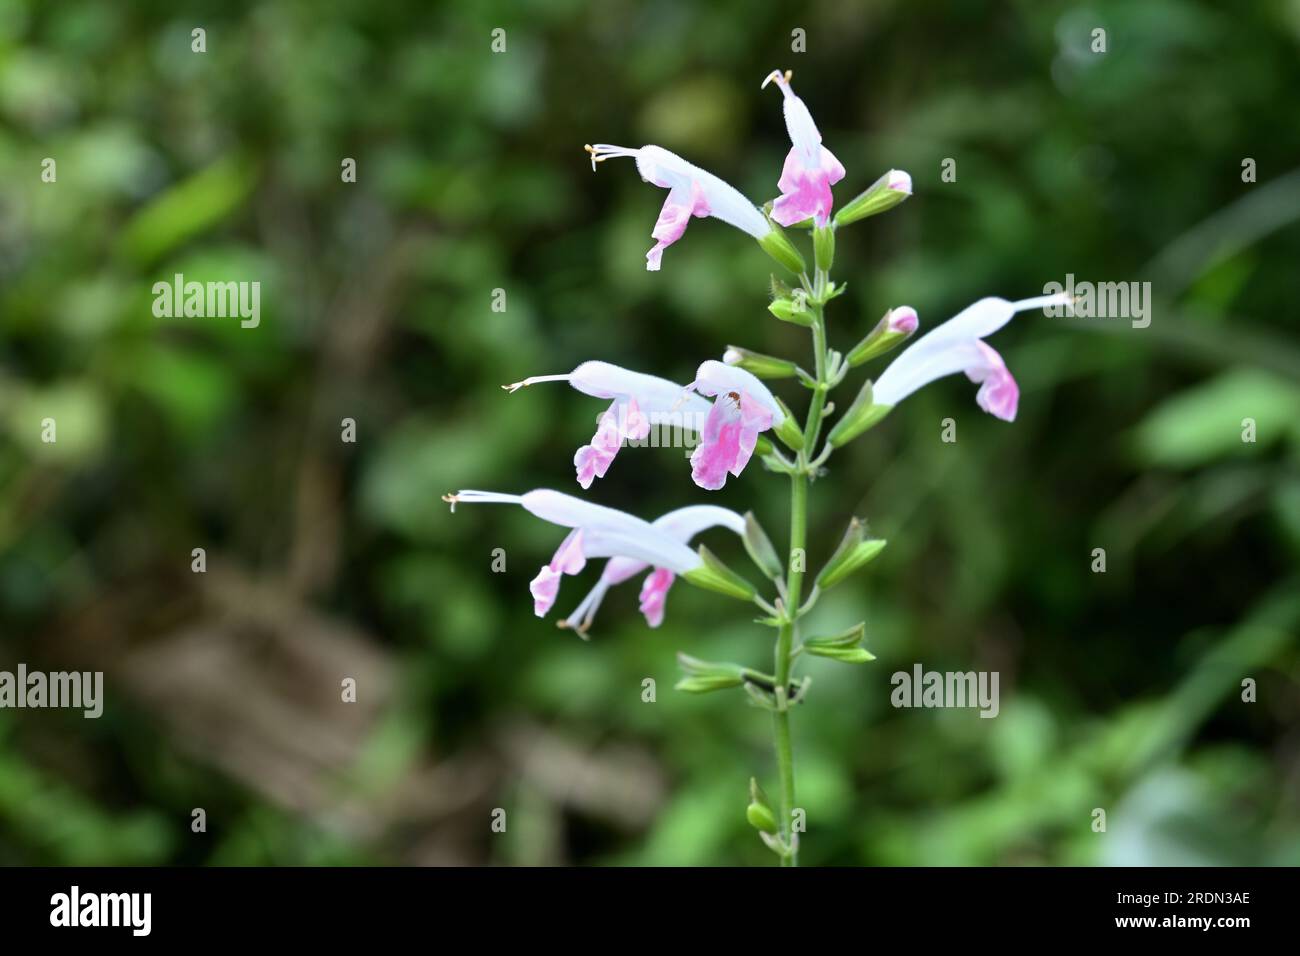 Close up view of a wild inflorescence which is bearing tiny white and purple color flowers Stock Photo